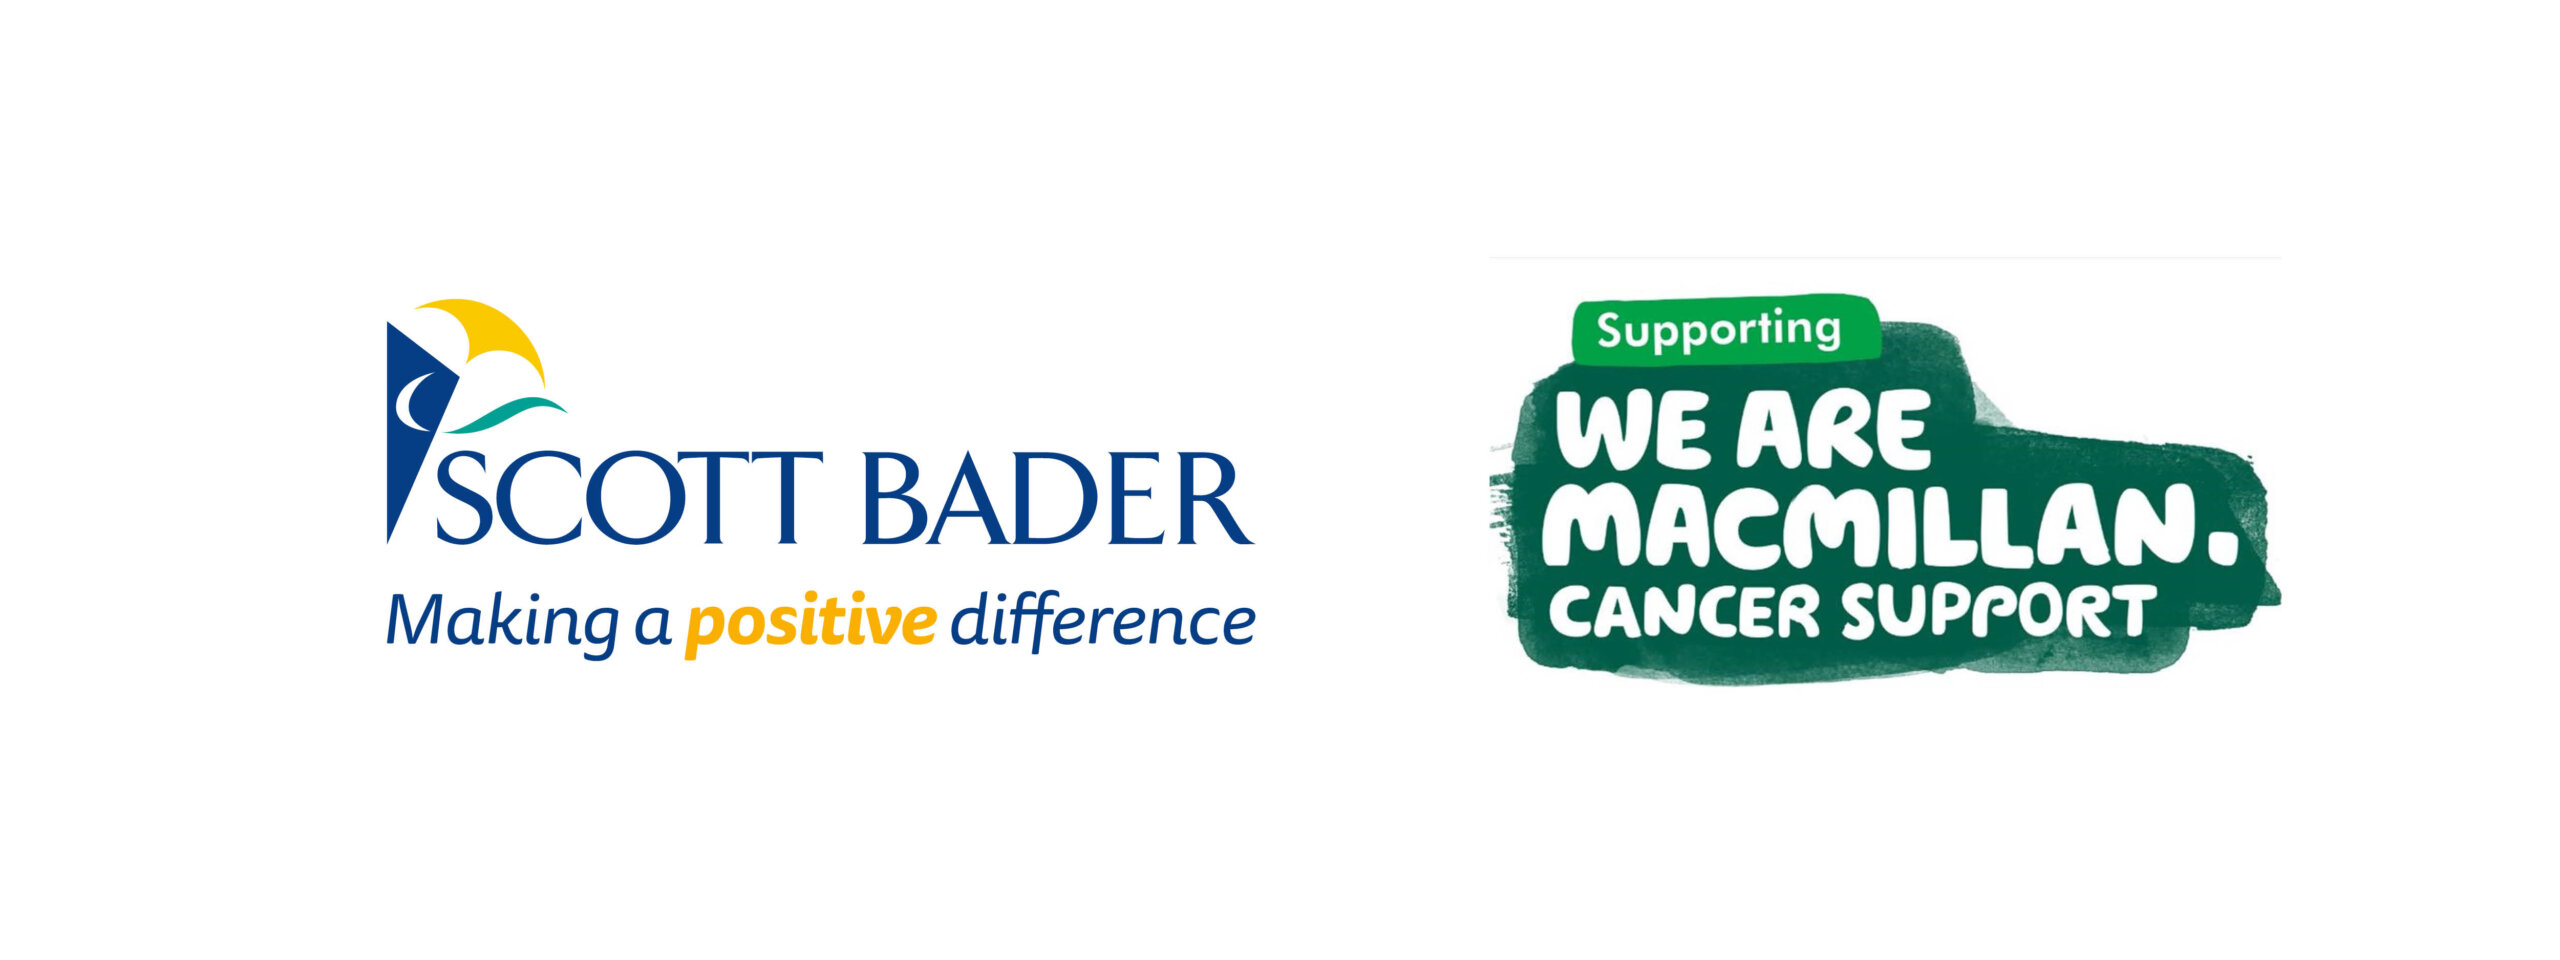 Scott Bader UK raises nearly £20,000 for Macmillan Cancer Support over the past 15 years